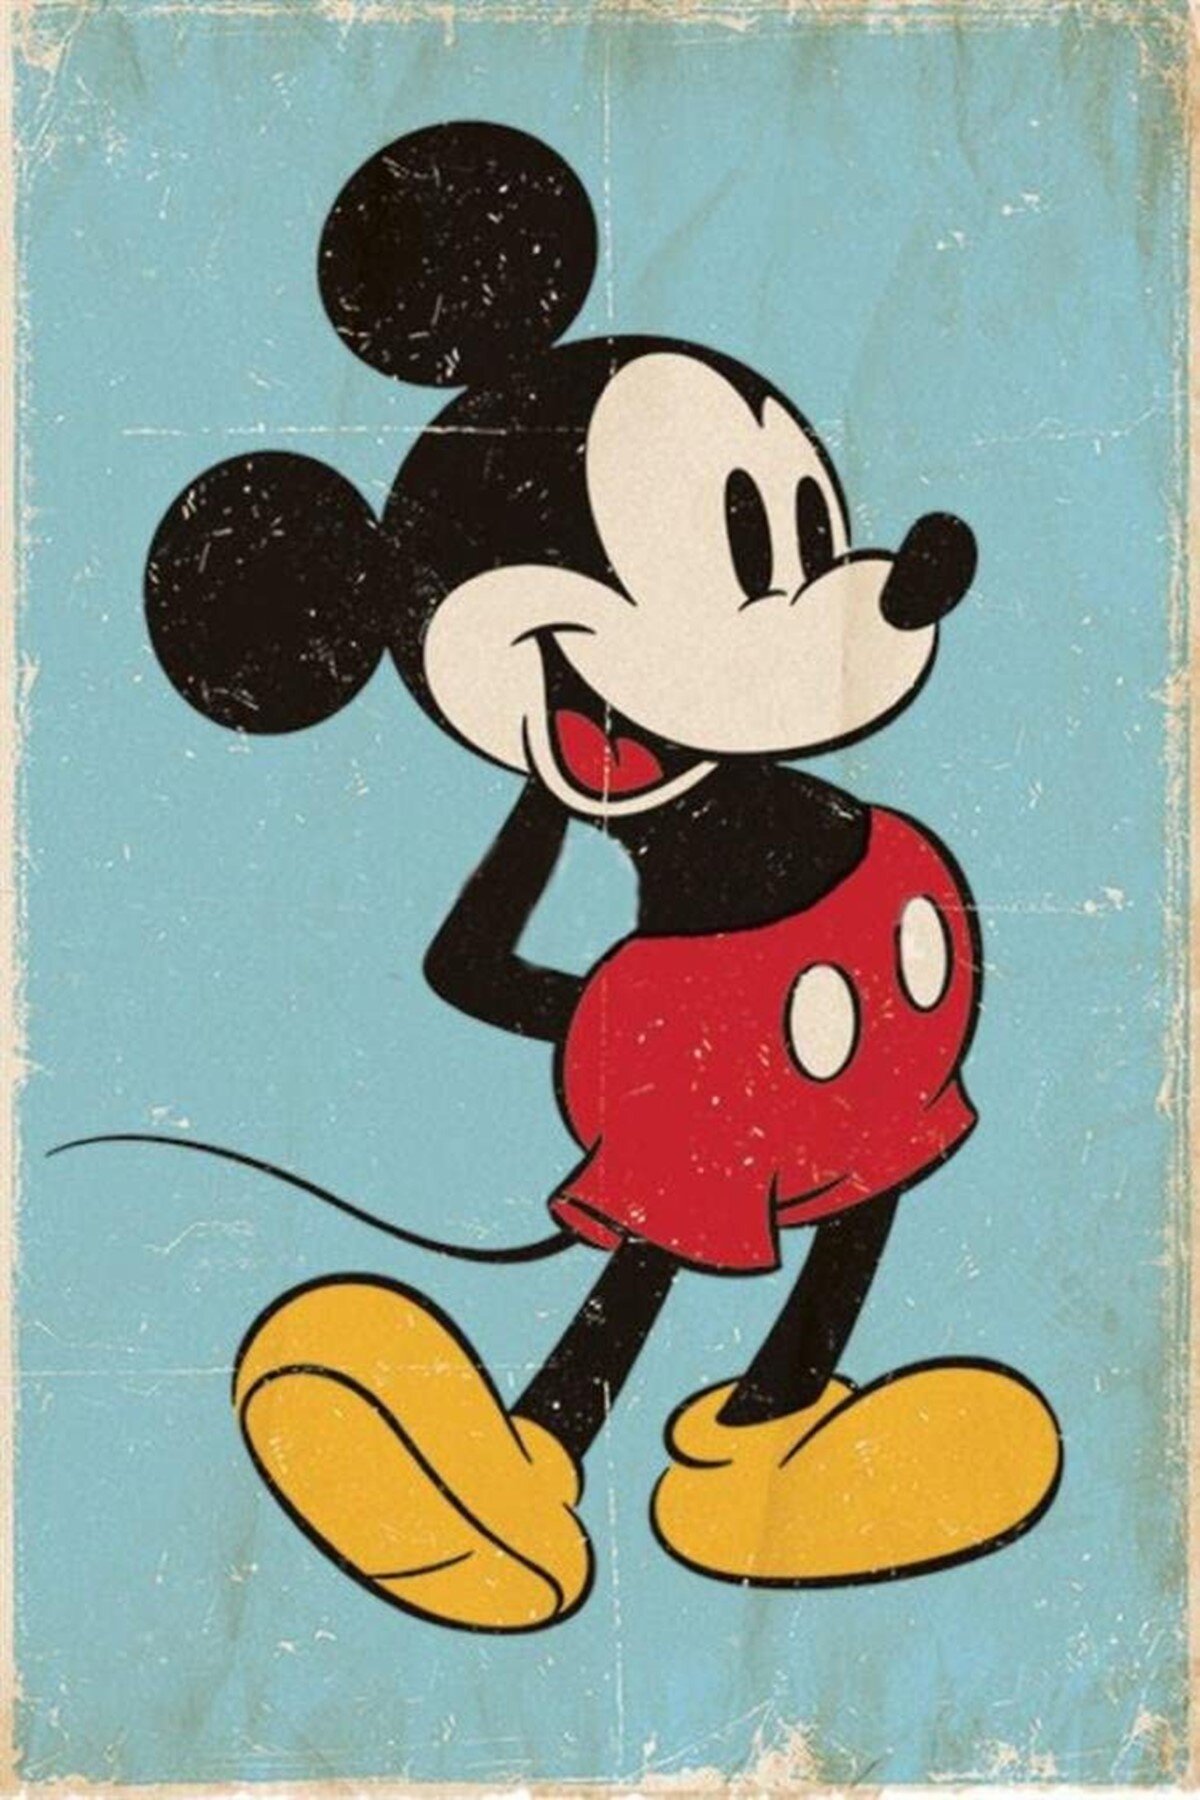 Buy For Less Mickey Mouse 36x24 Art Print Poster - Graphic Art - Wayfair Canada